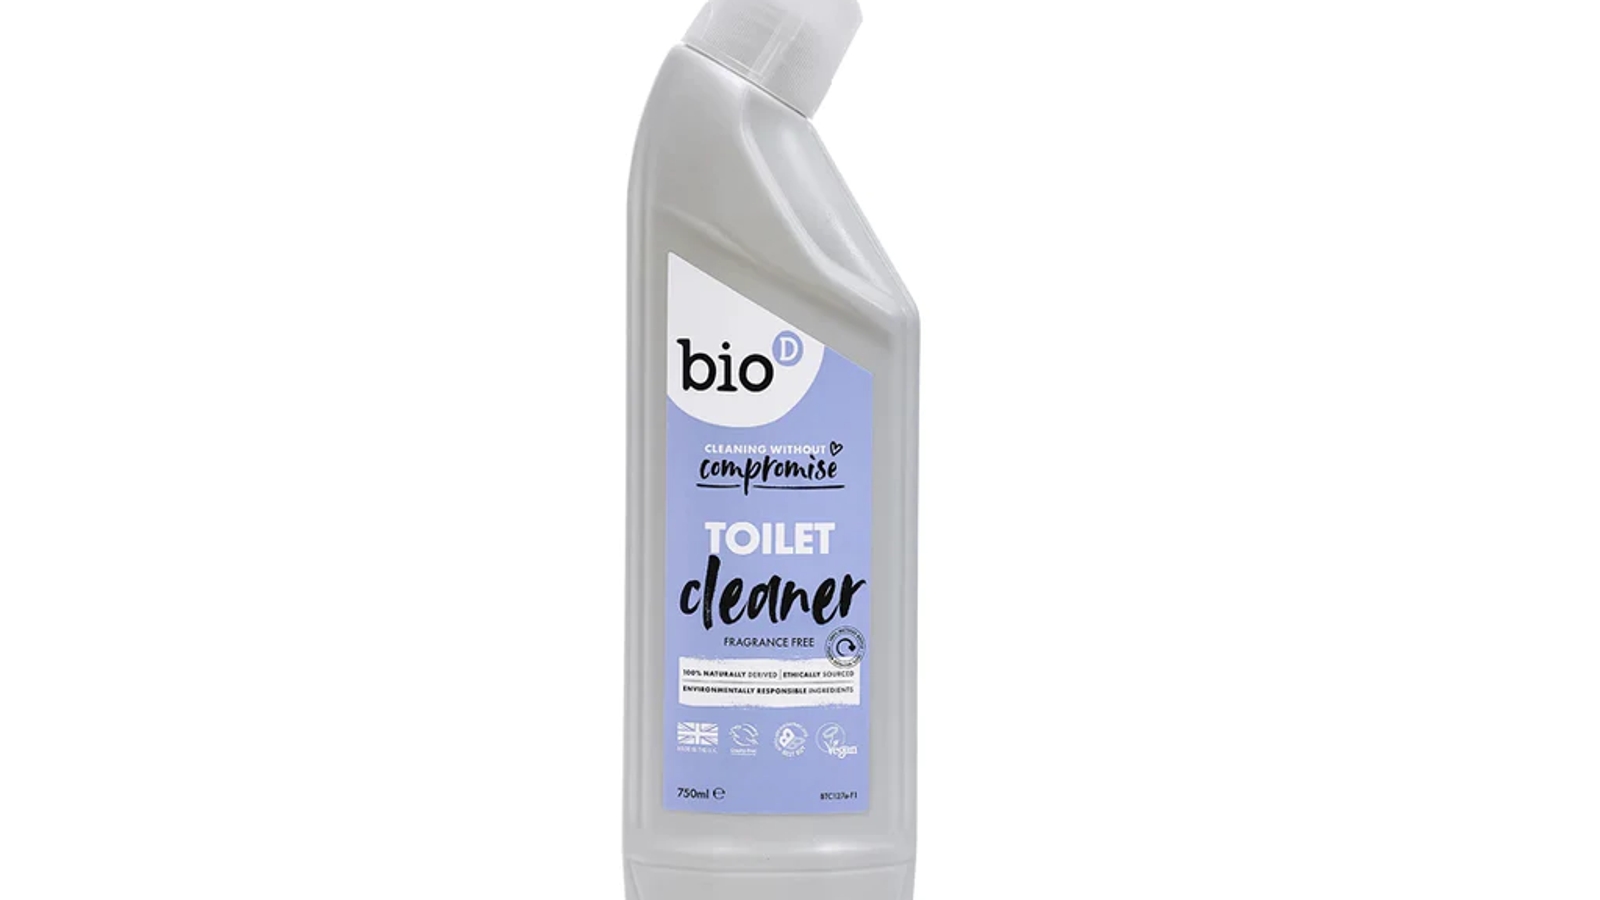 A bottle of Bio-D toilet cleaner